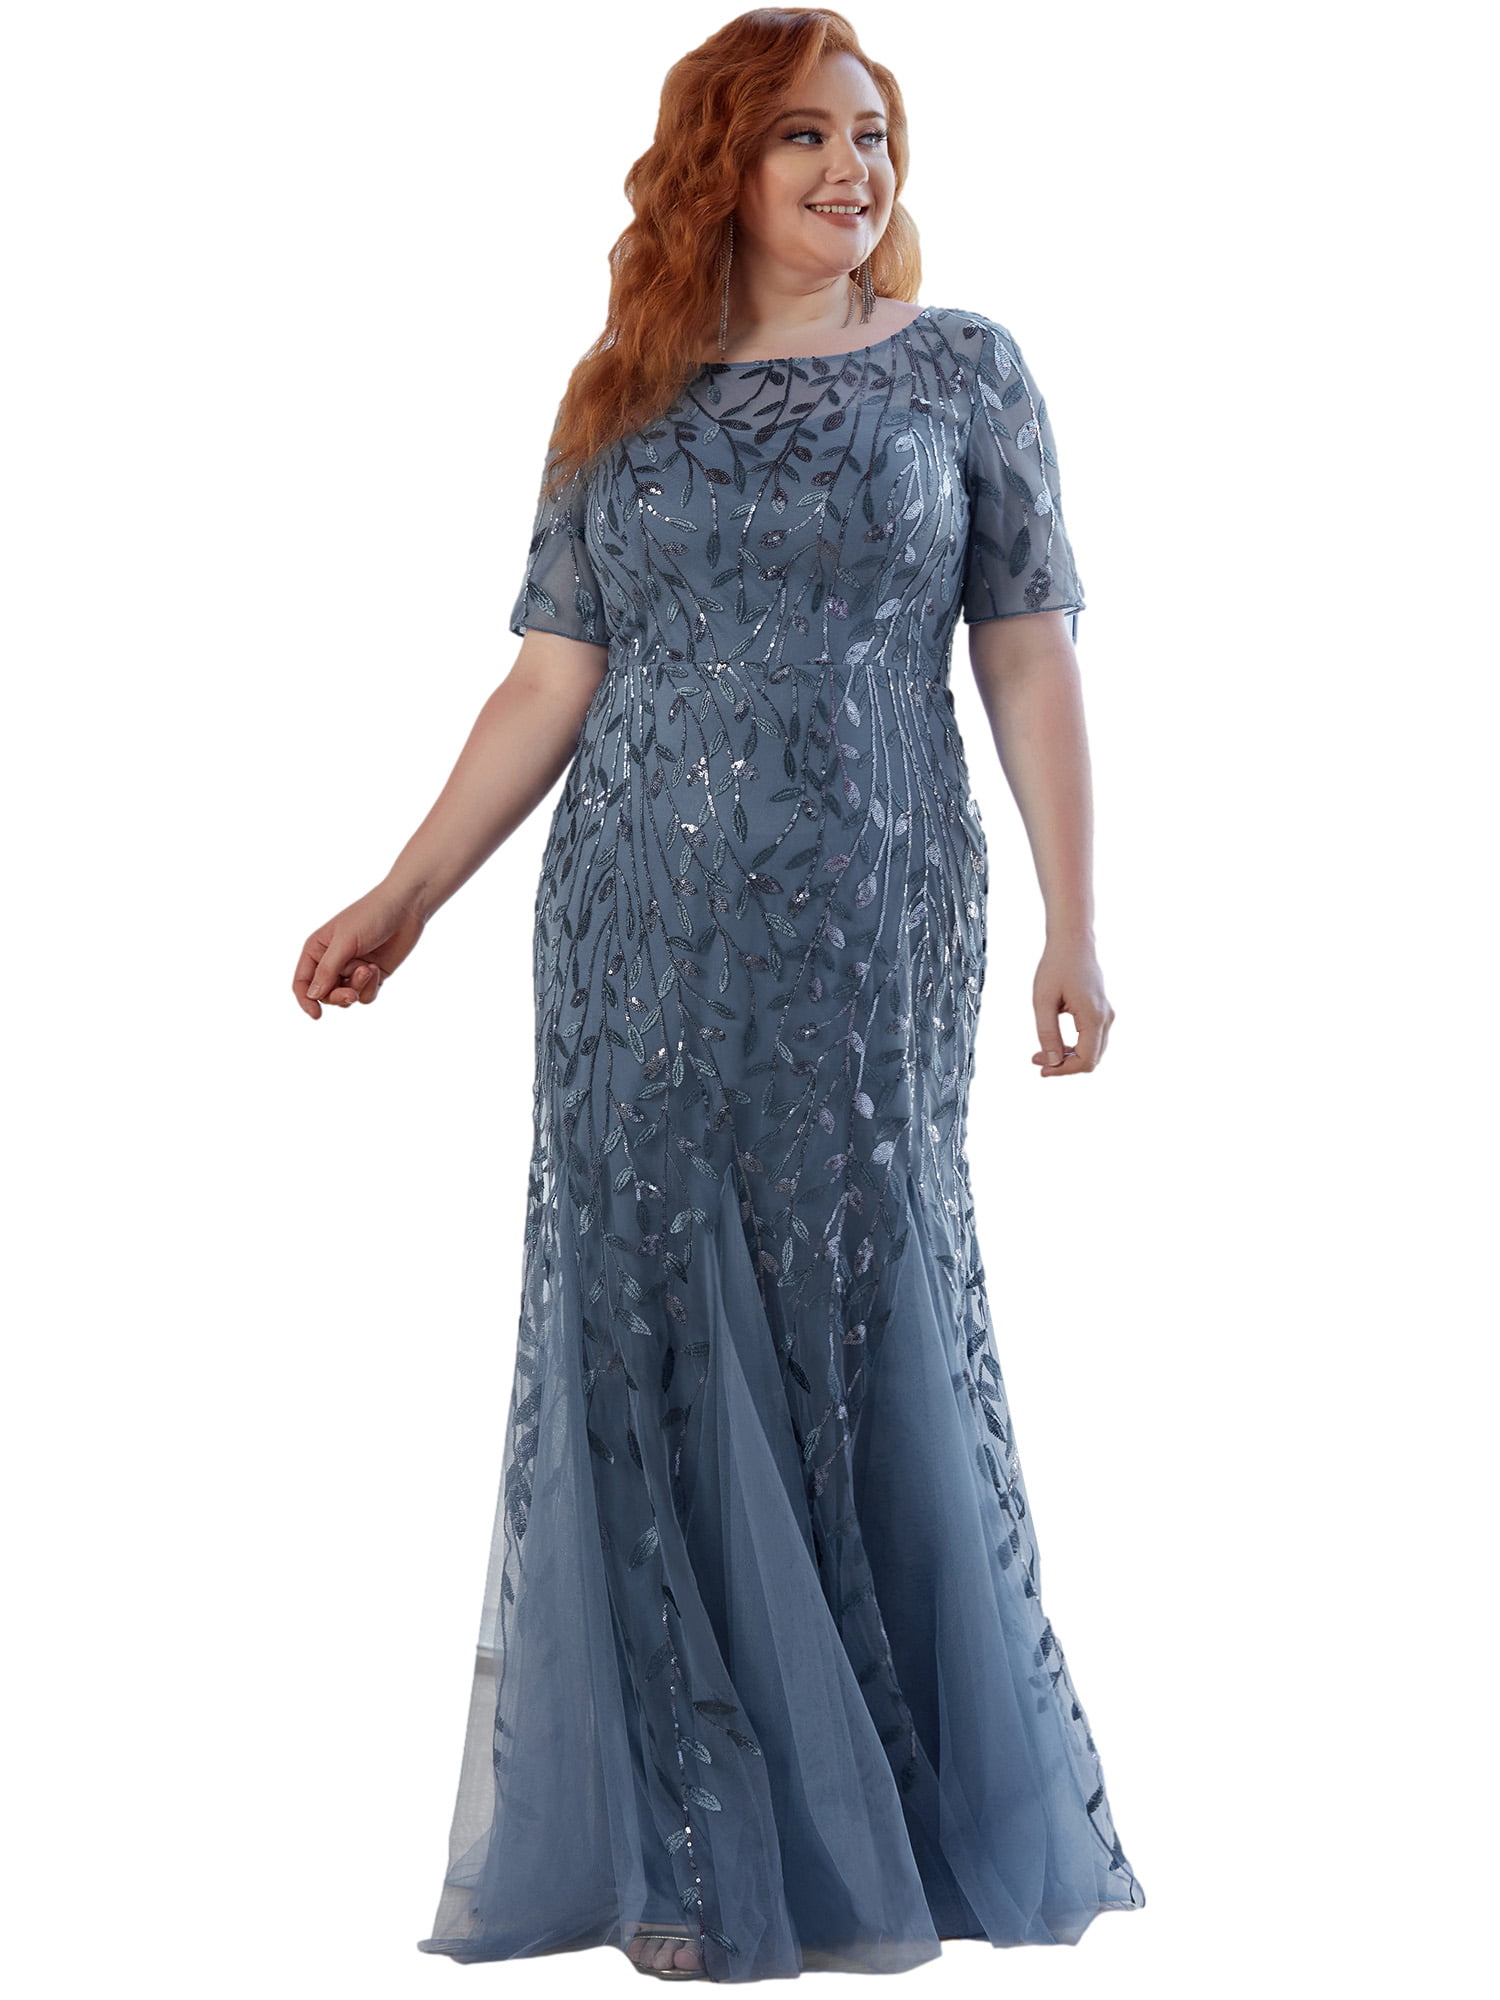 Ever-Pretty UK Lace Long Grey Mother Of The Bride Evening Formal Dresses 08878 